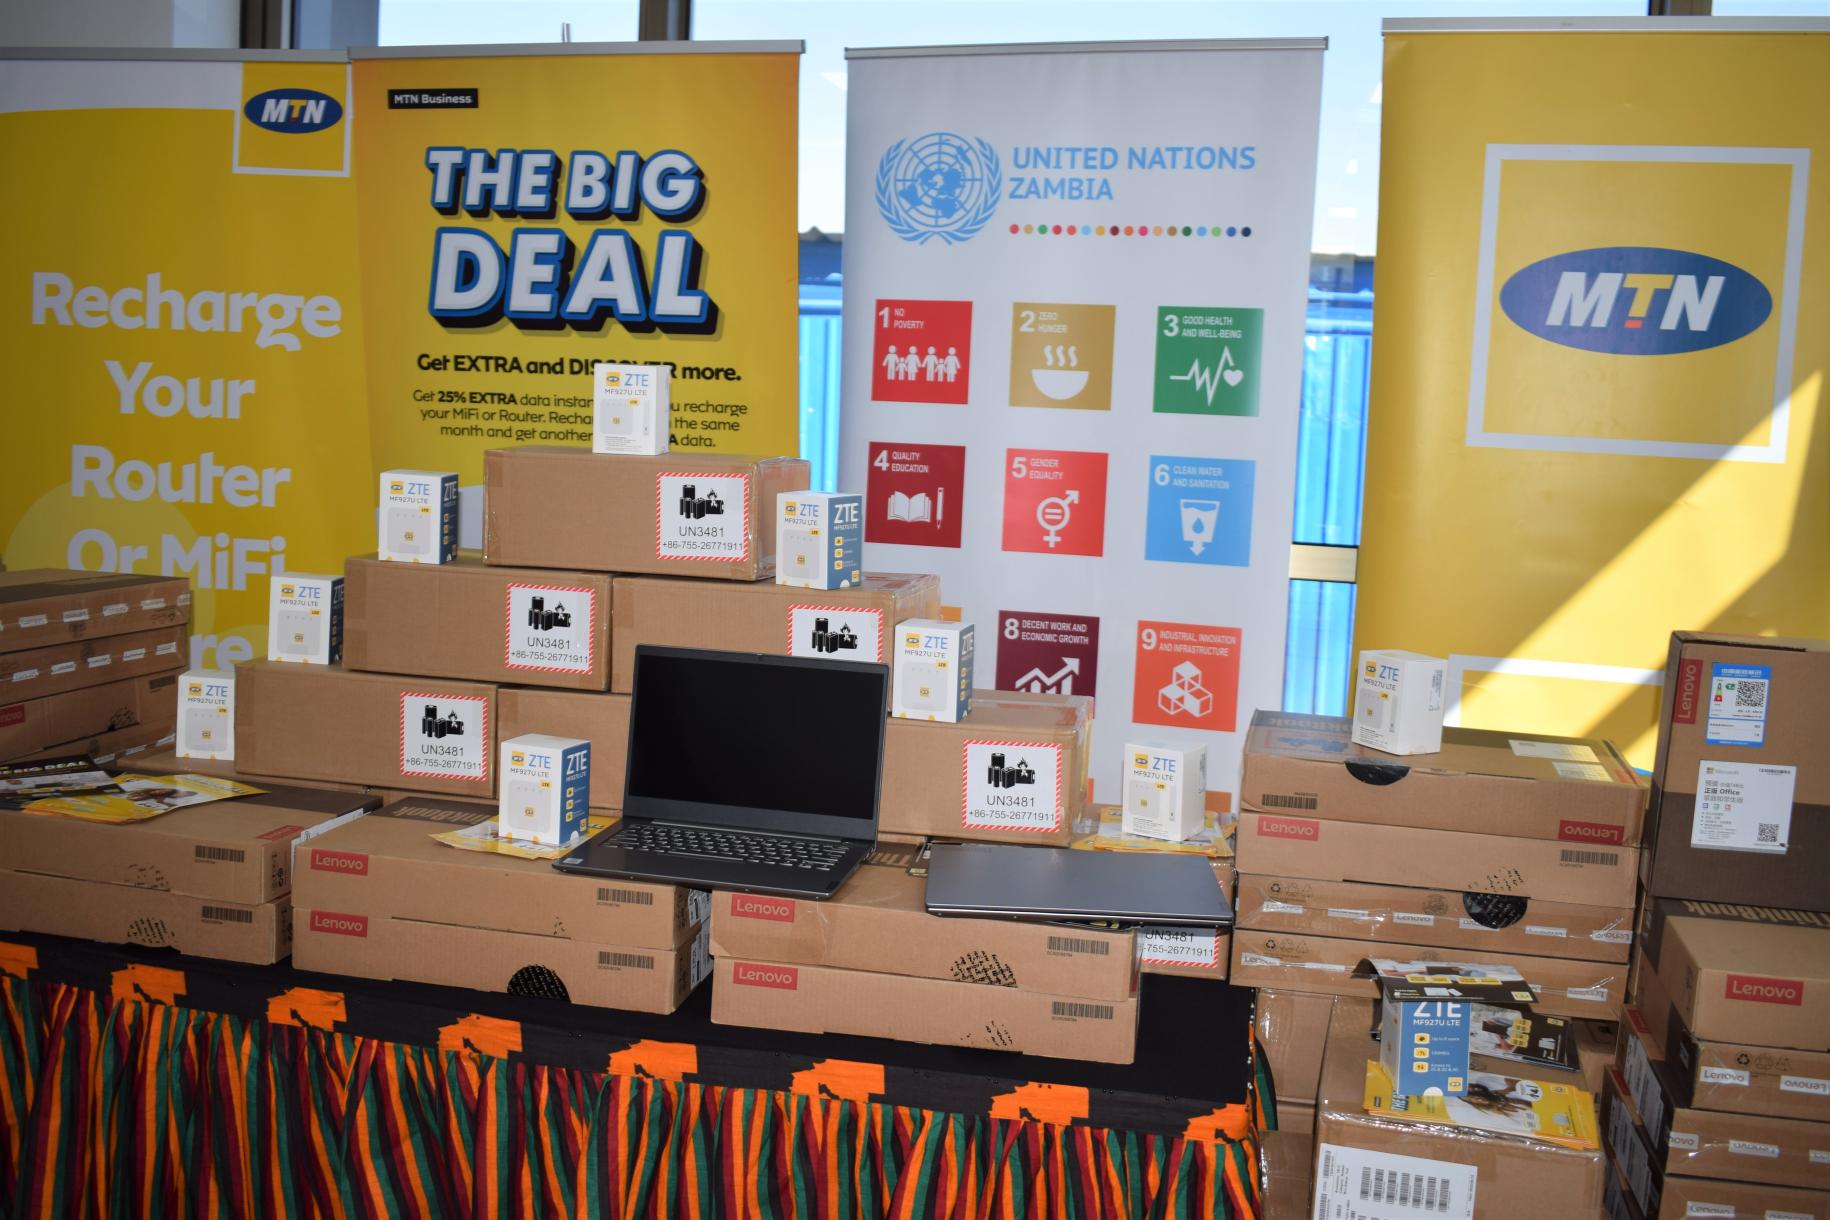 Digital equipment provided by the UN in Zambia to support government operations during the COVID-19 outbreak.